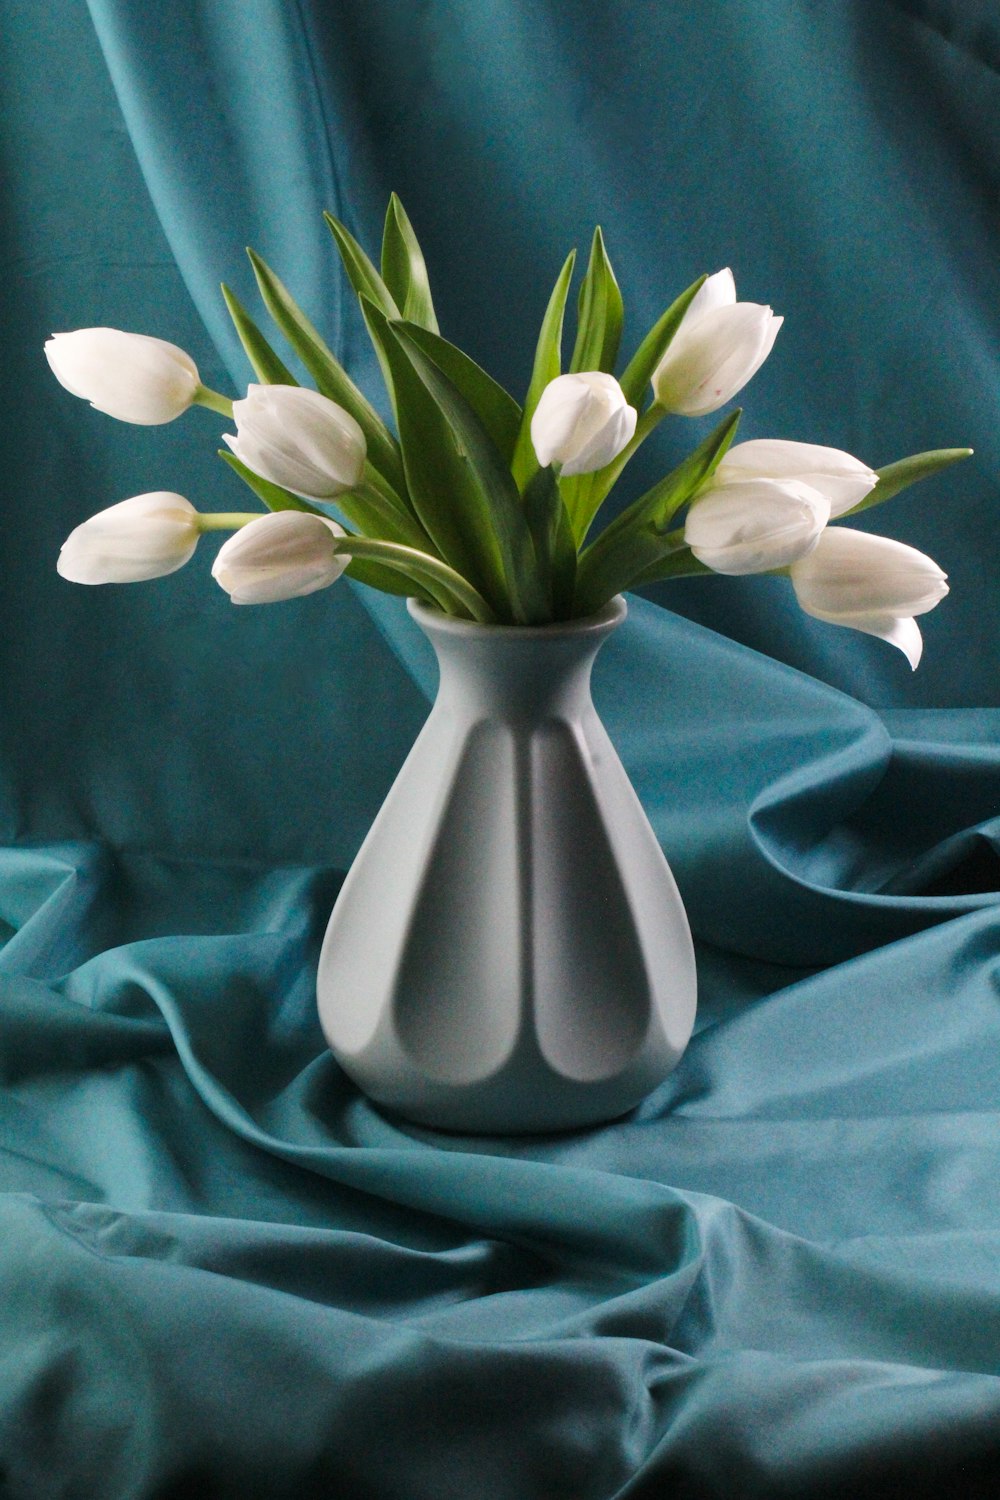 a vase with white flowers on a blue cloth